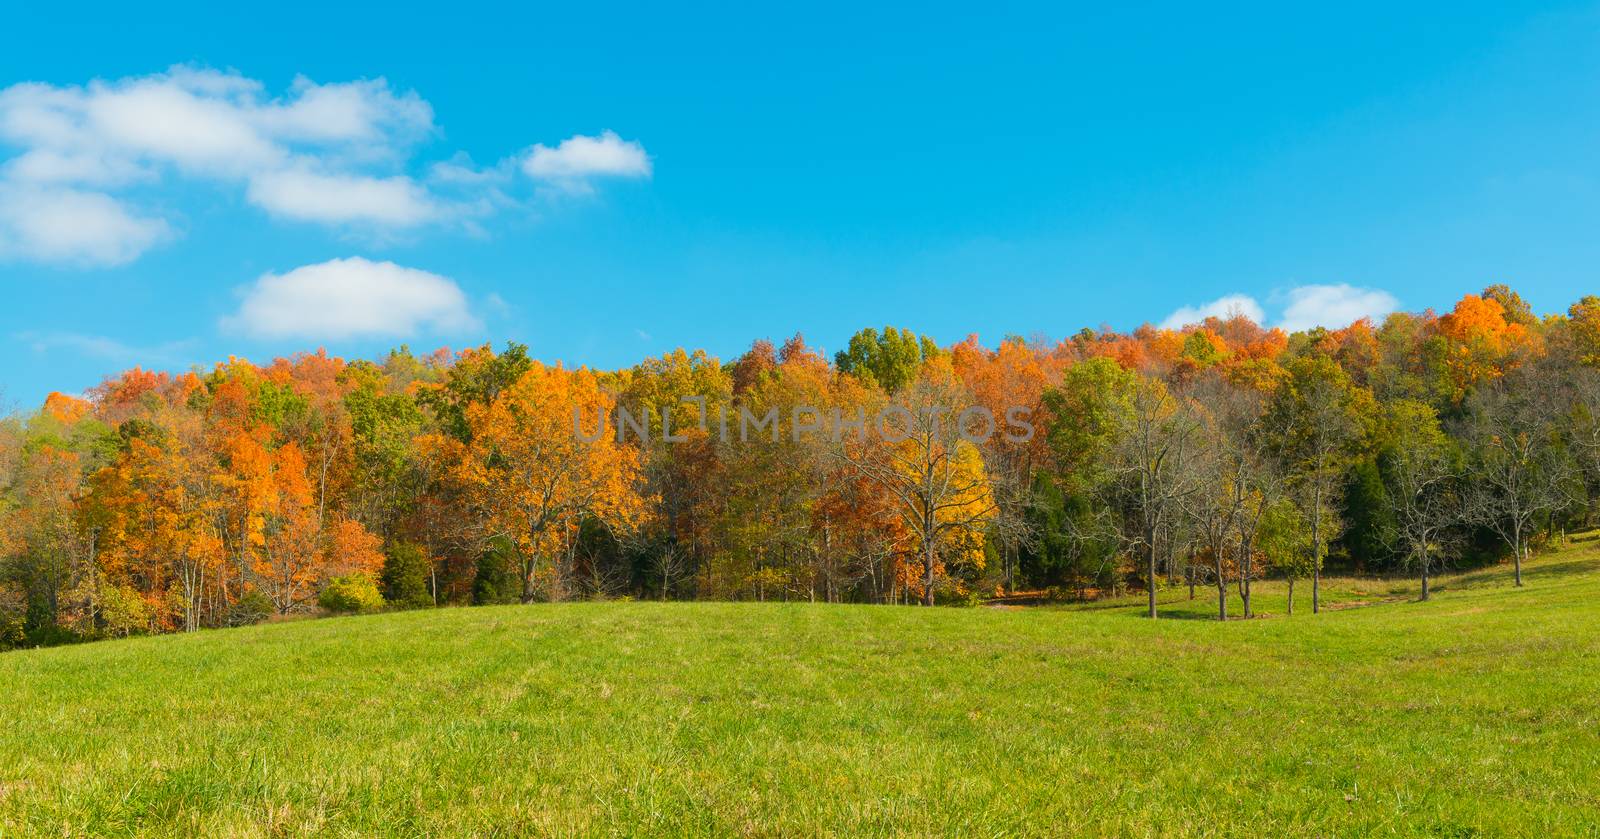 Field with Fall Trees  by patrickstock